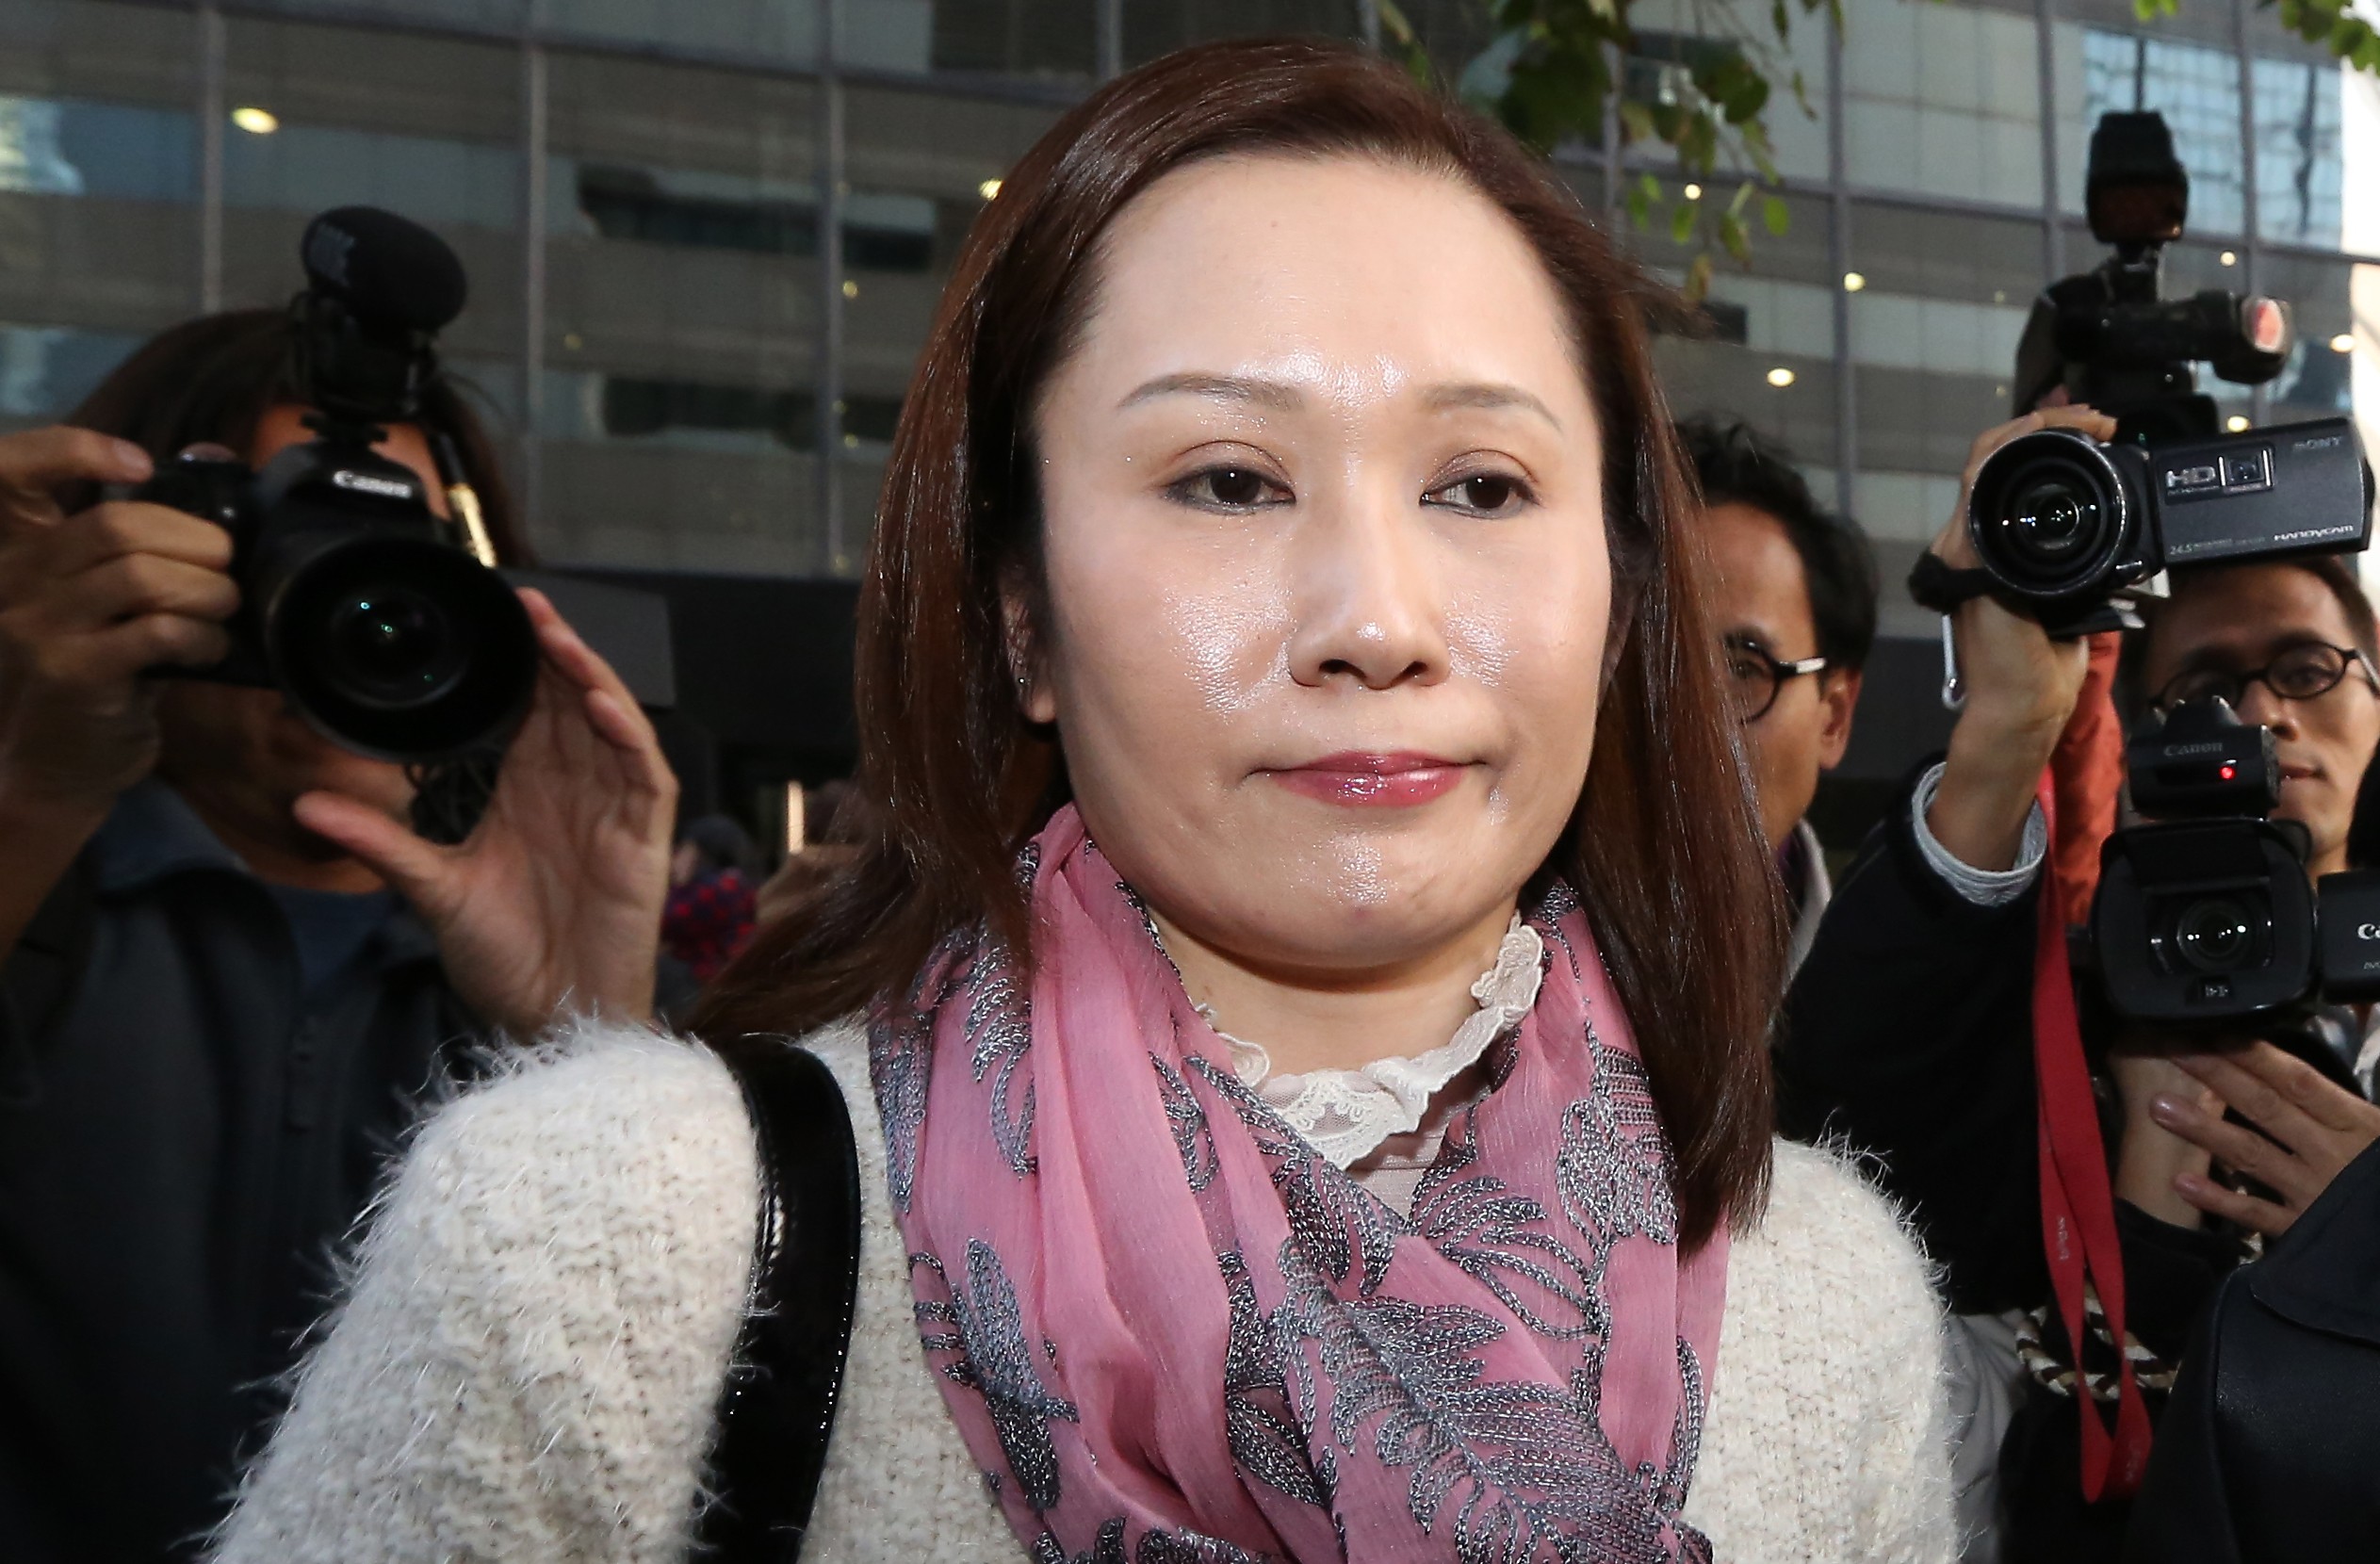 Law Wan-tung has been involved in two court cases involving Indonesian women she employed. Photo: Sam Tsang